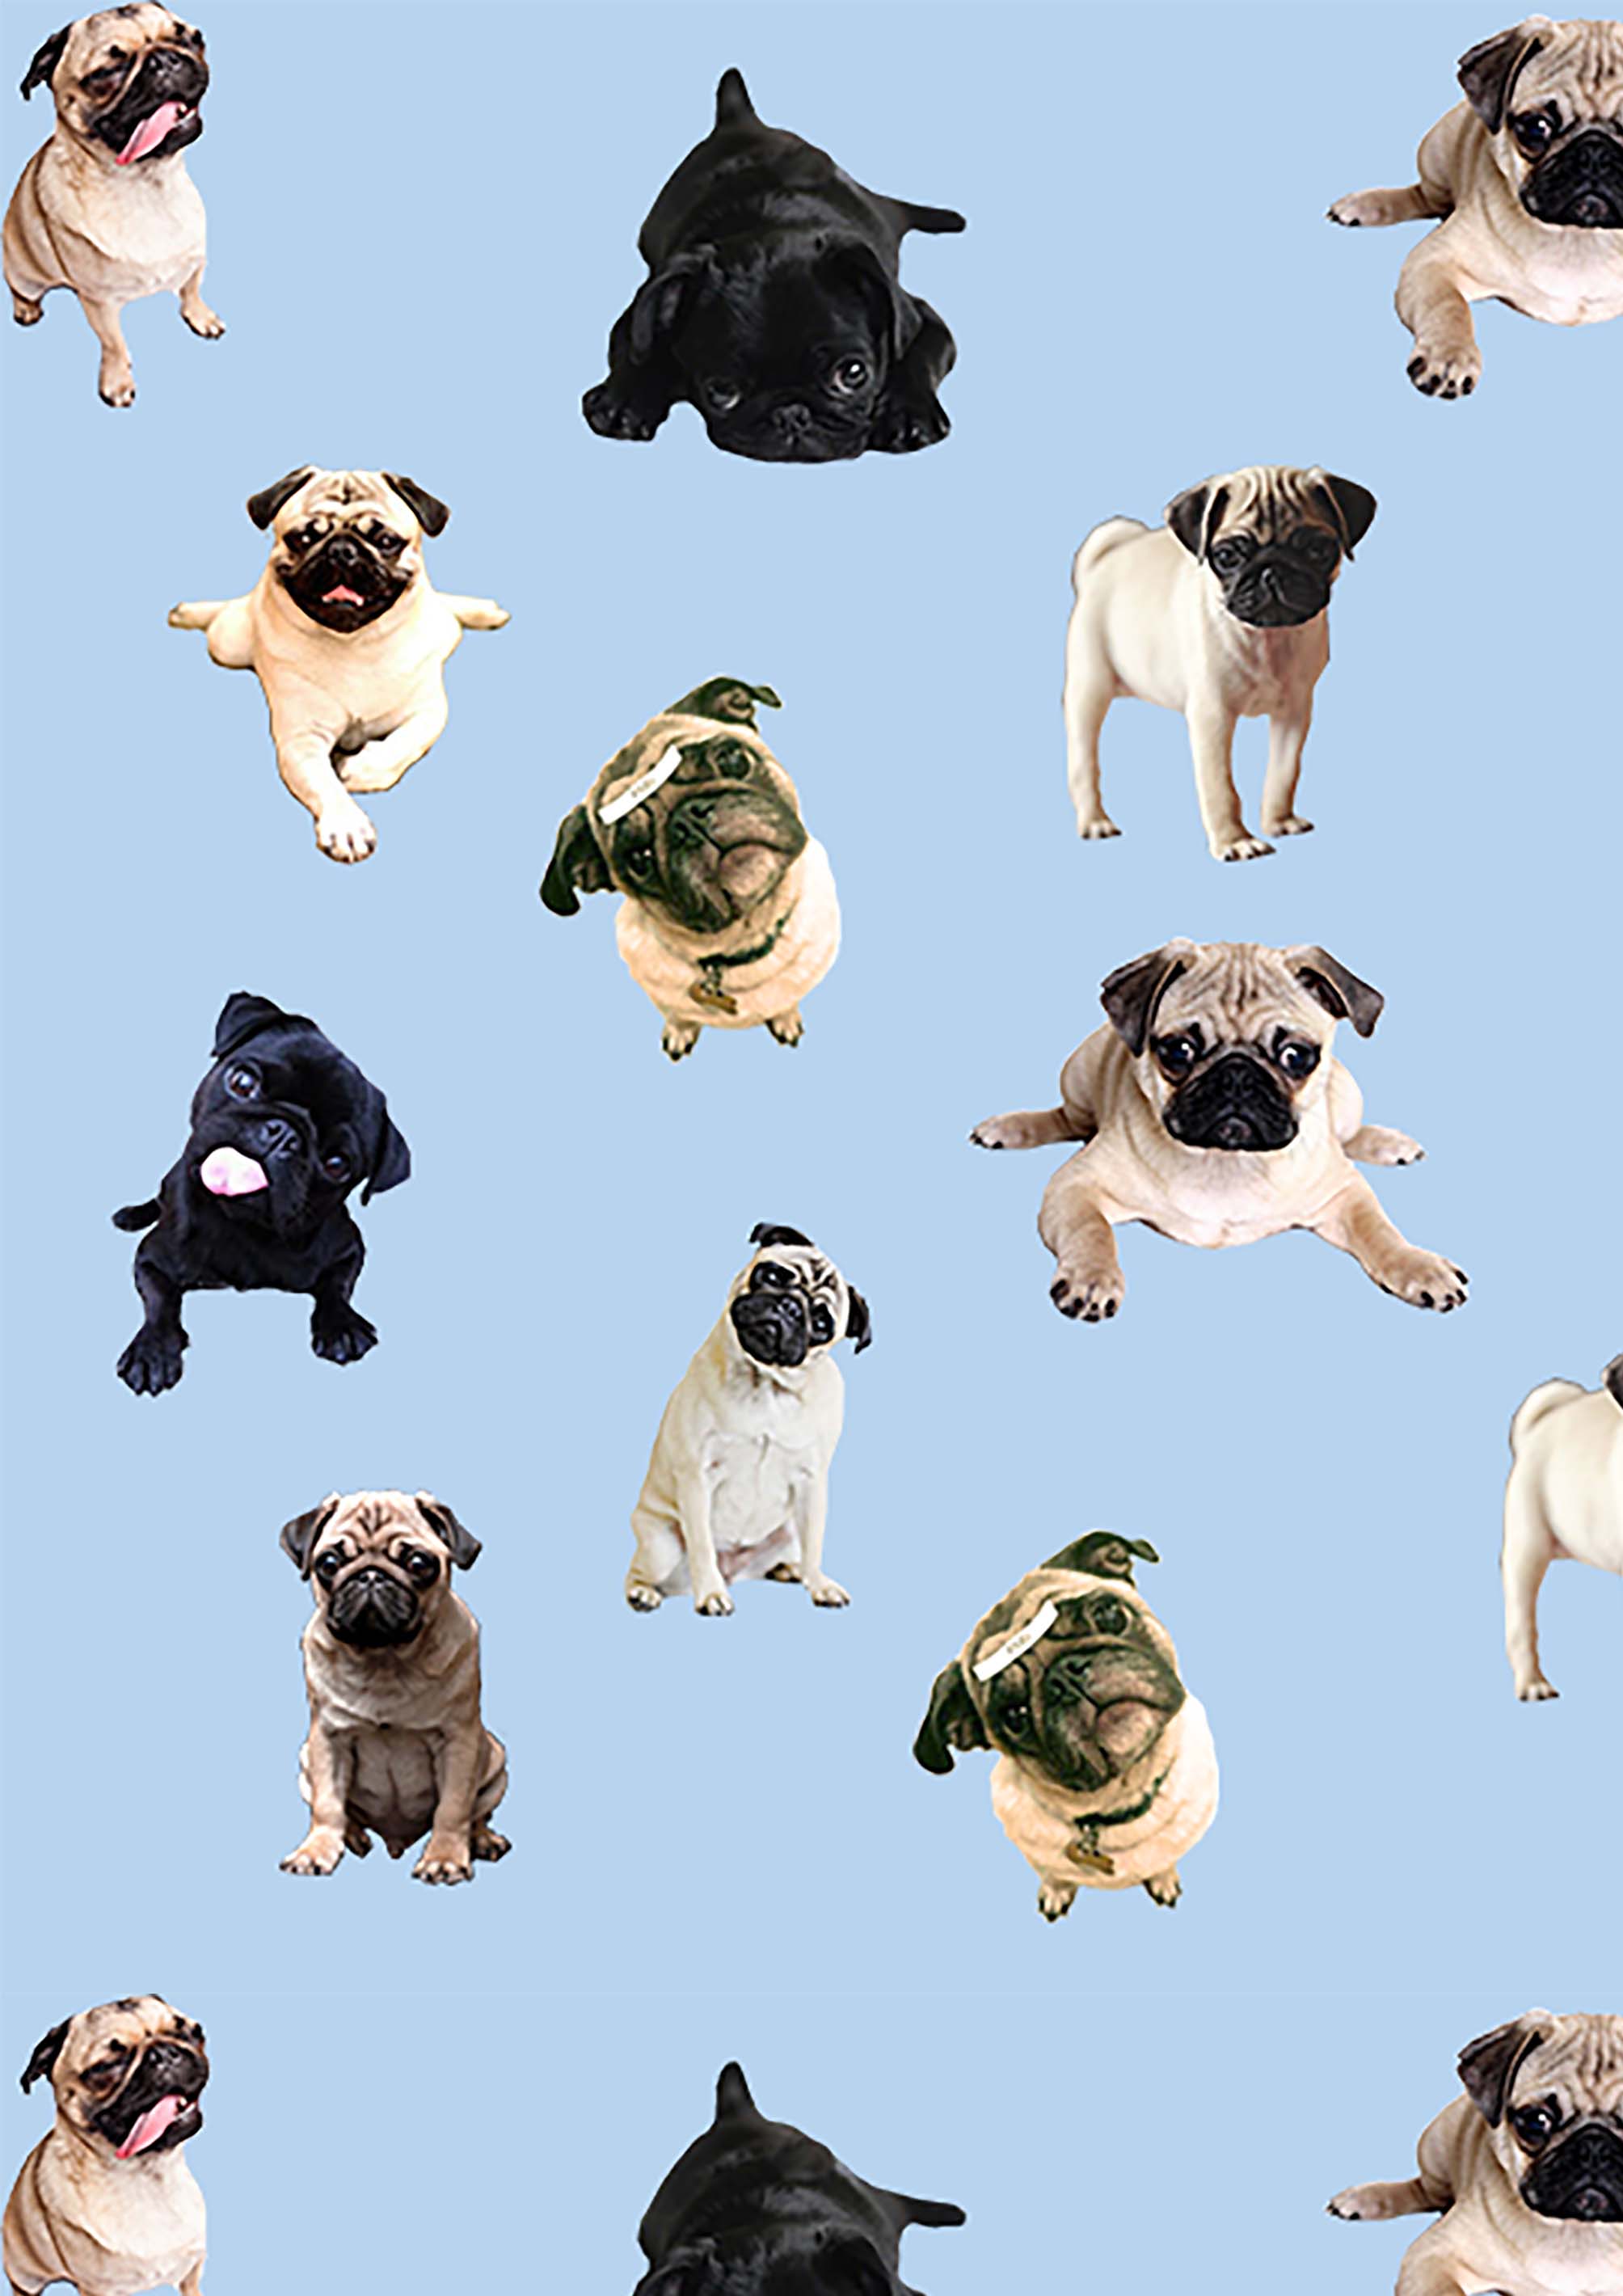 Pug Commission Phone Wallpaper by CreepyClassic on DeviantArt